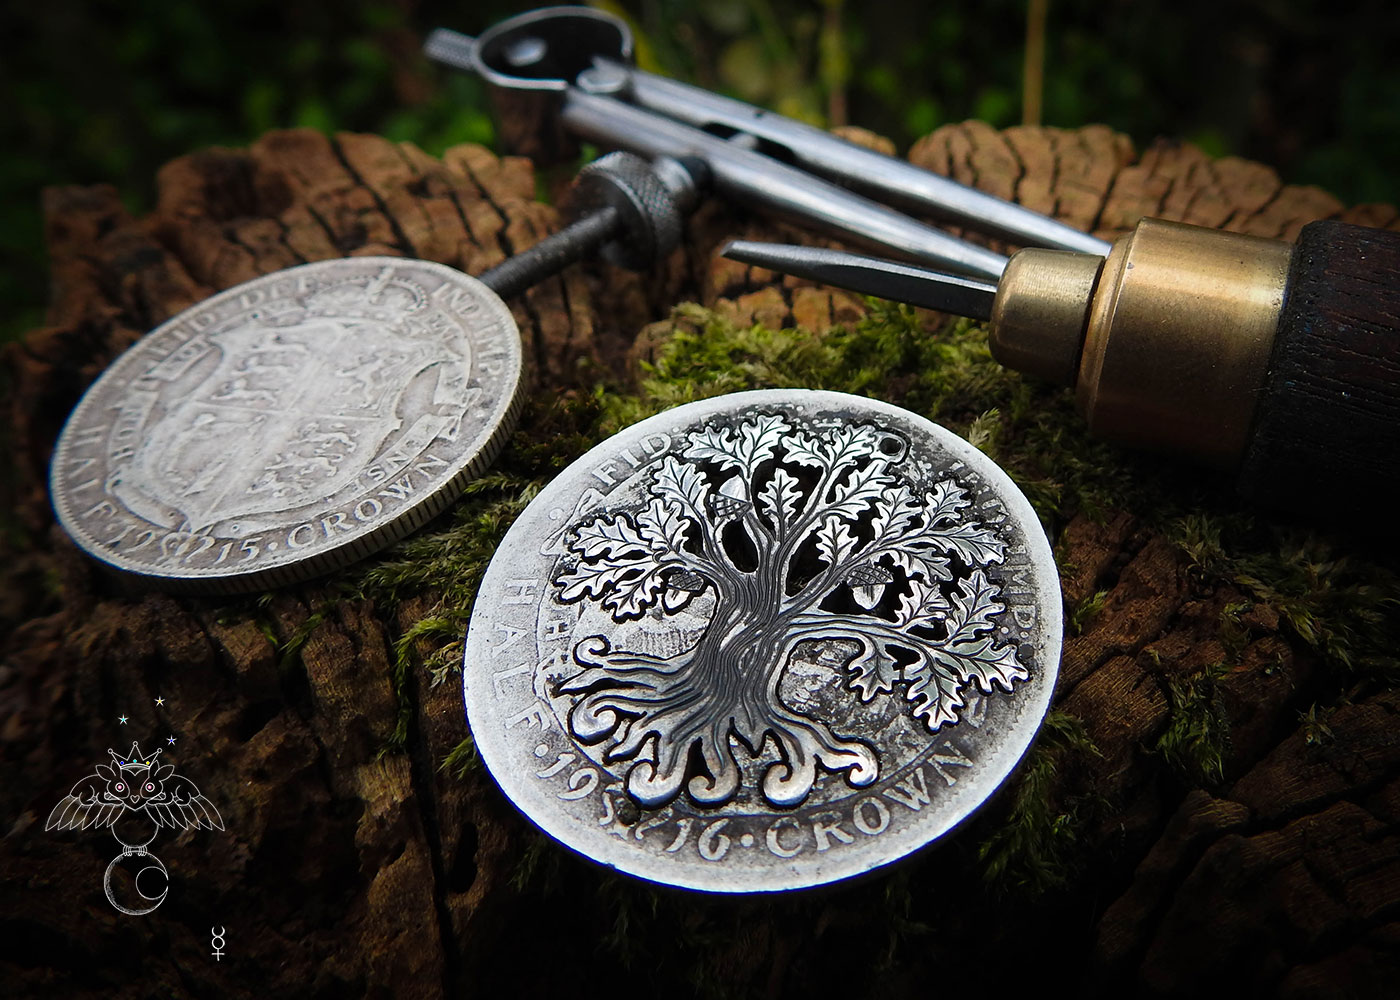 Oak tree necklace - handcrafted and recycled silver Half Crown coin